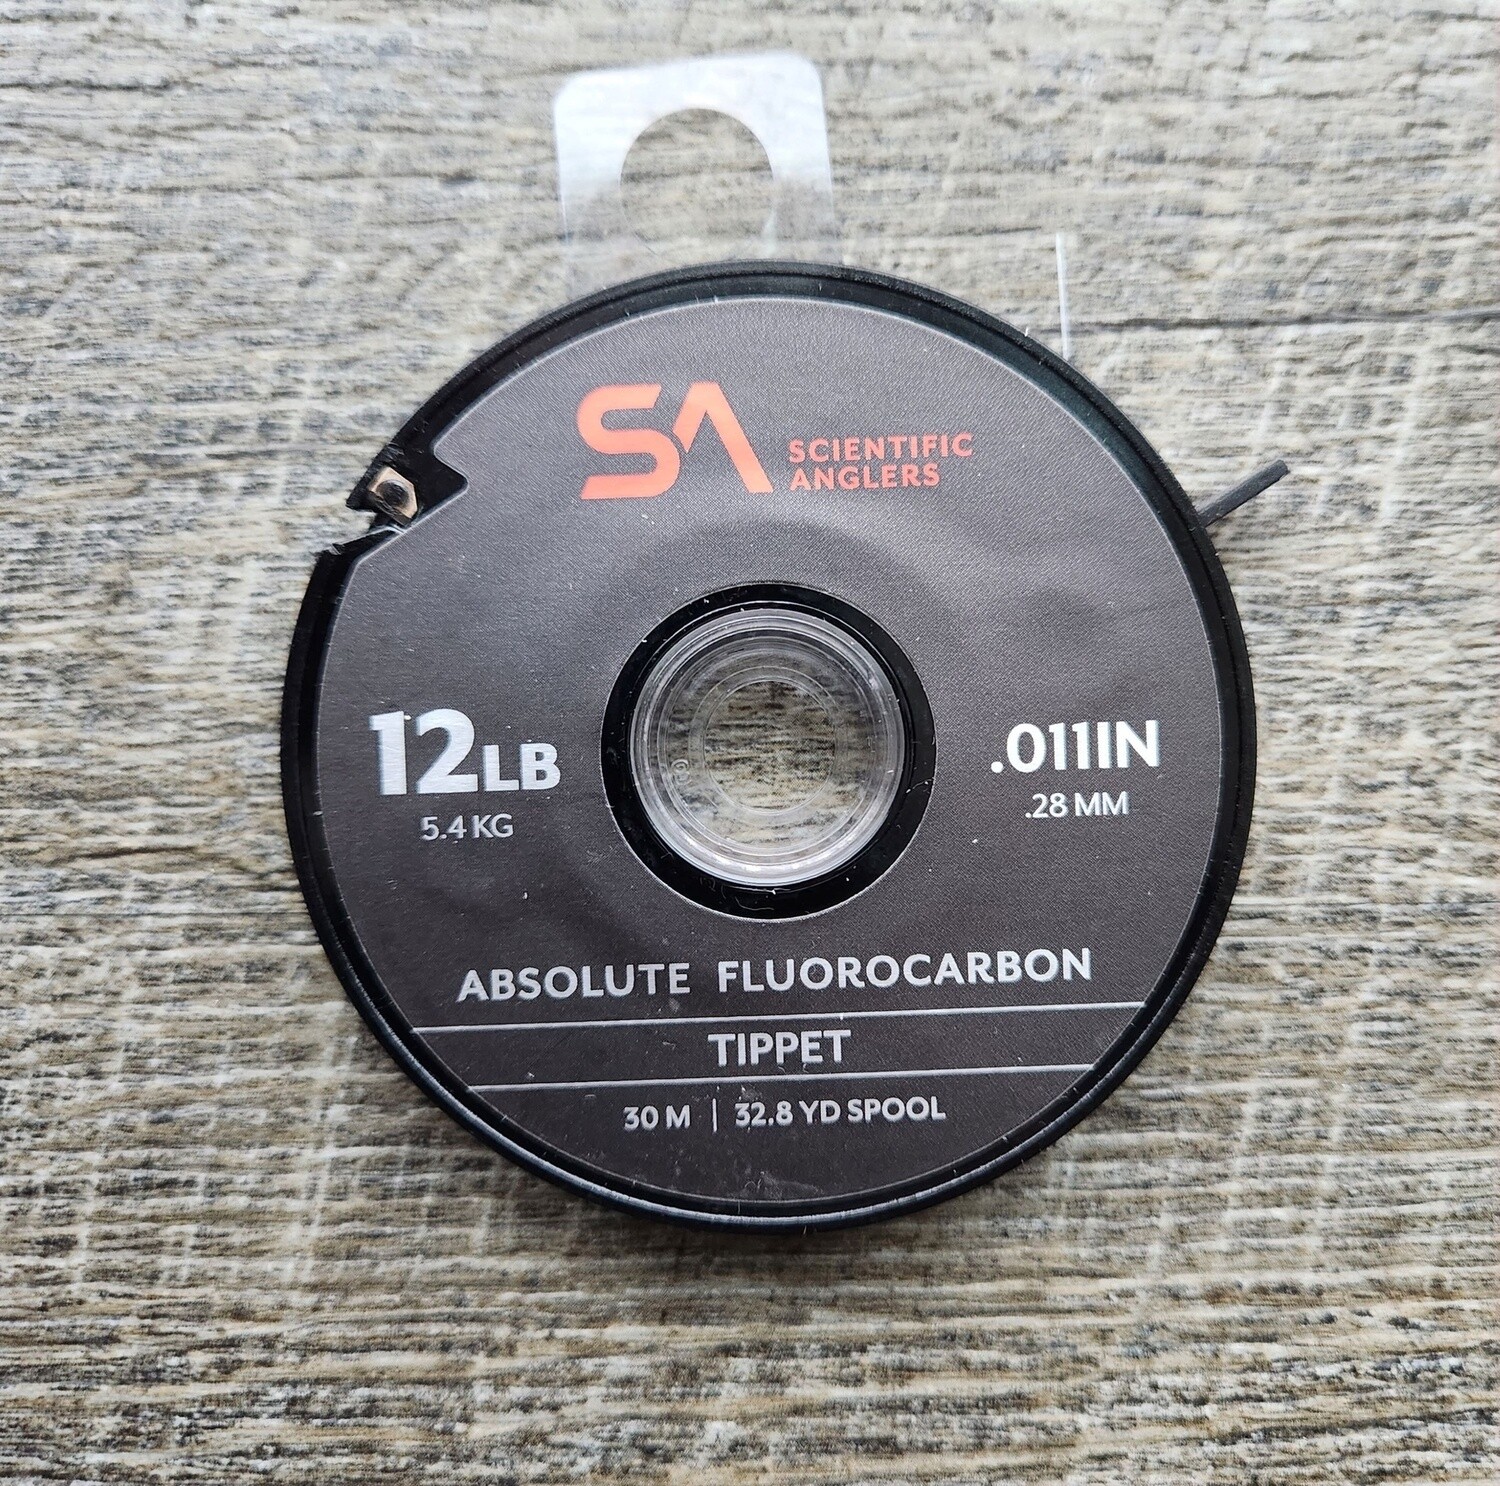 SA ABSOLUTE FLUOROCARBON TIPPET